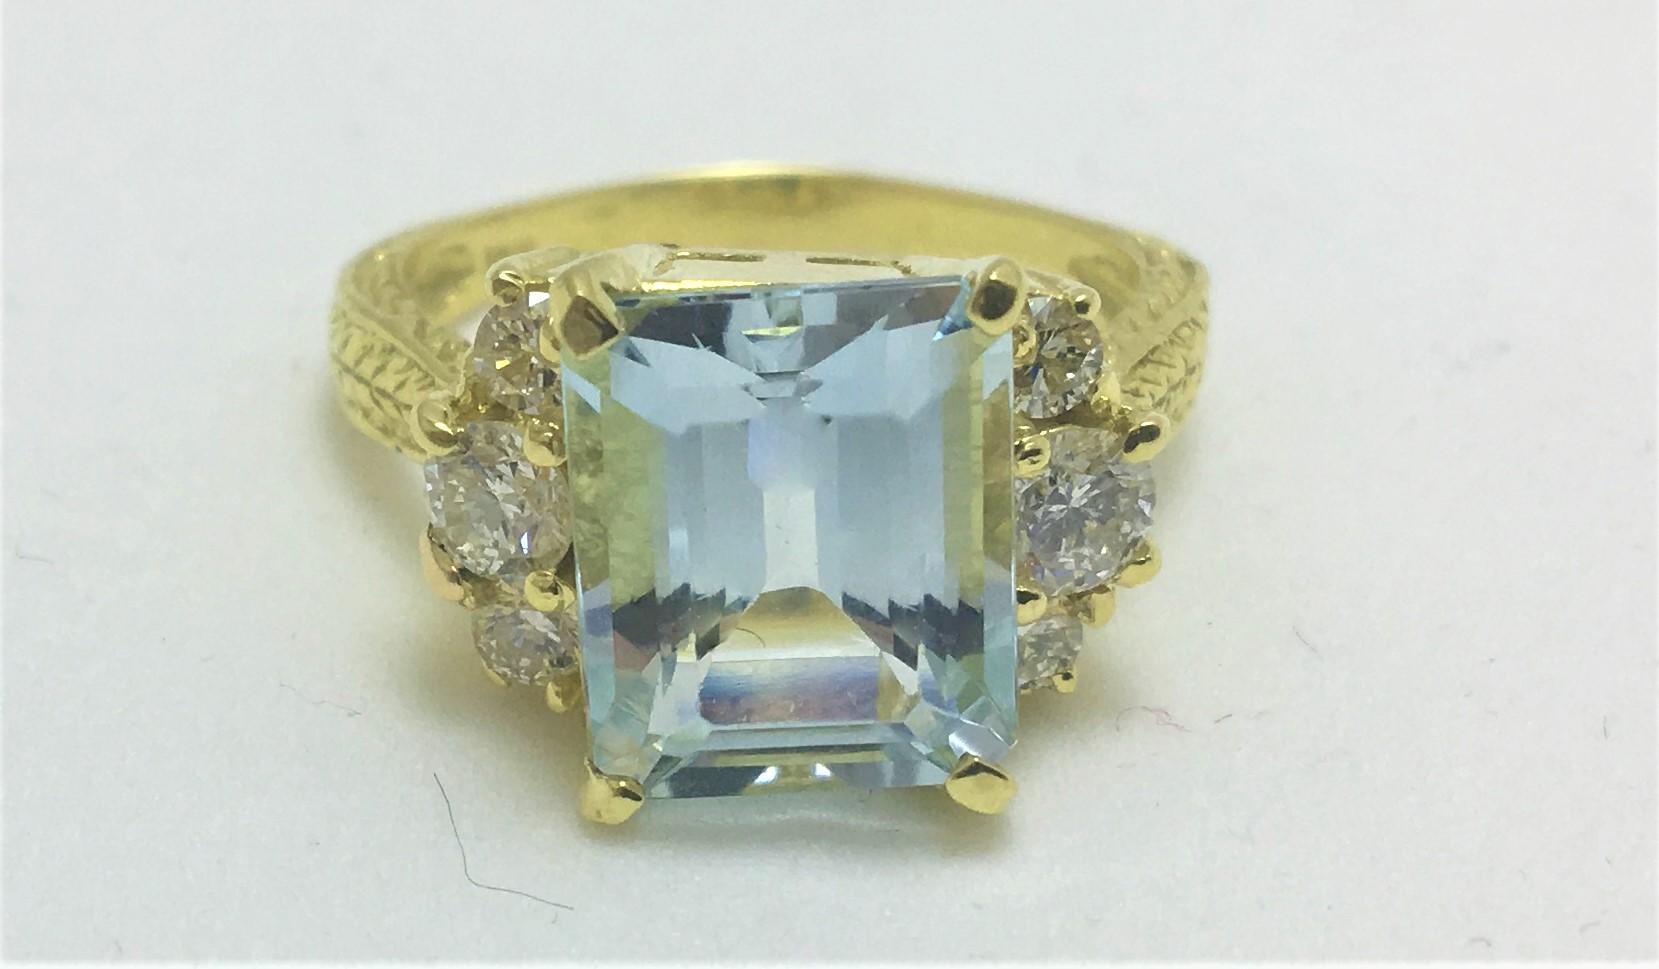 Emerald Cut Aquamarine Ring, approximately 4.49 carats, approximately 11 x 9 x 6.4mm
6 round diamonds (3 on each side of aquamarine), approximately .64 total diamond weight
18K yellow gold mounting with 